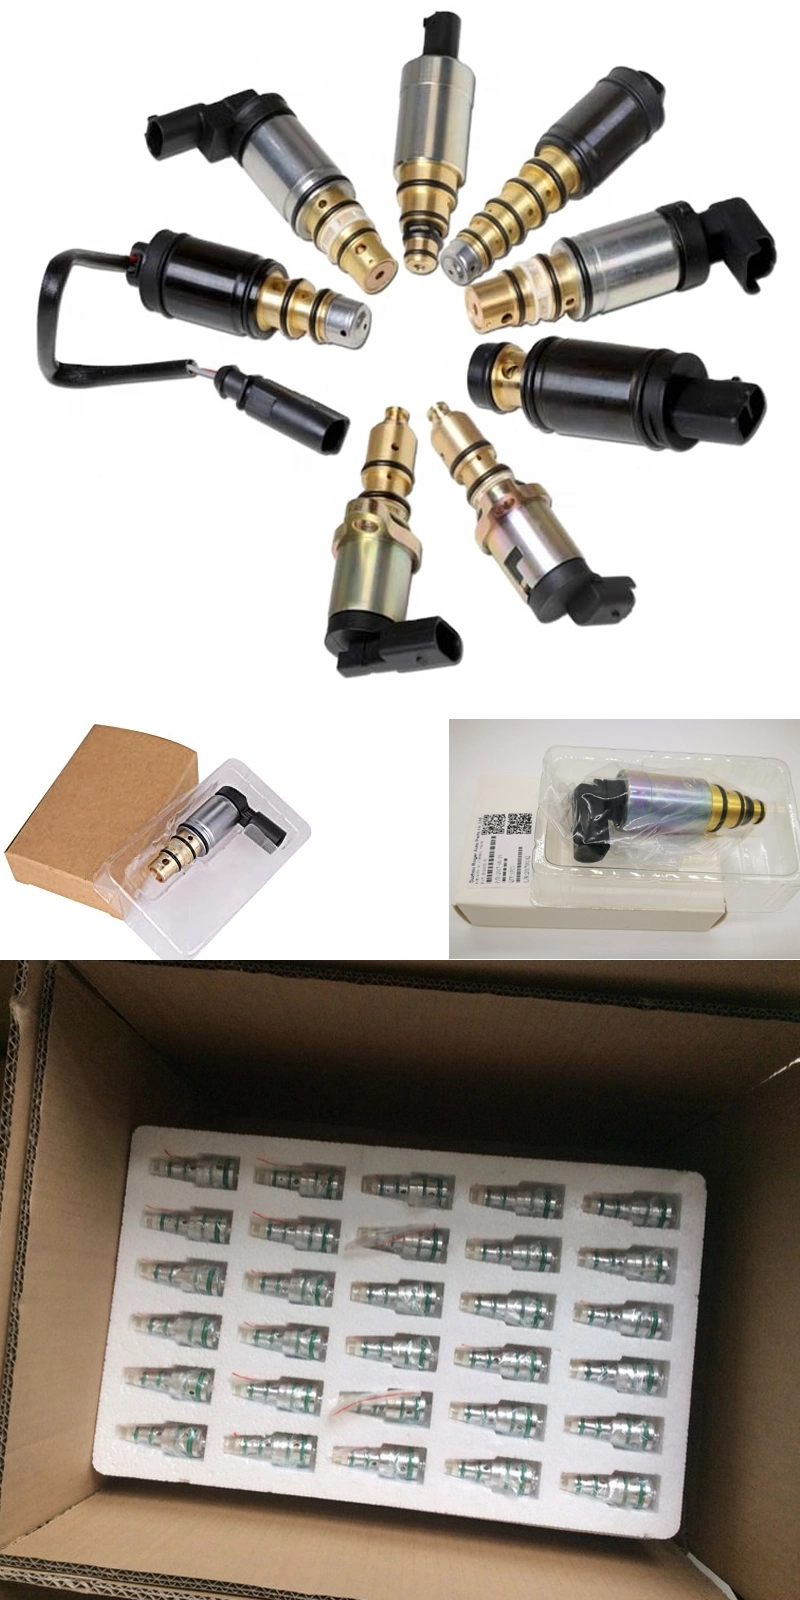 Auto Supply # Bas03015 (50 Pack) Jra Style A/C Valve Core for R-1234yf